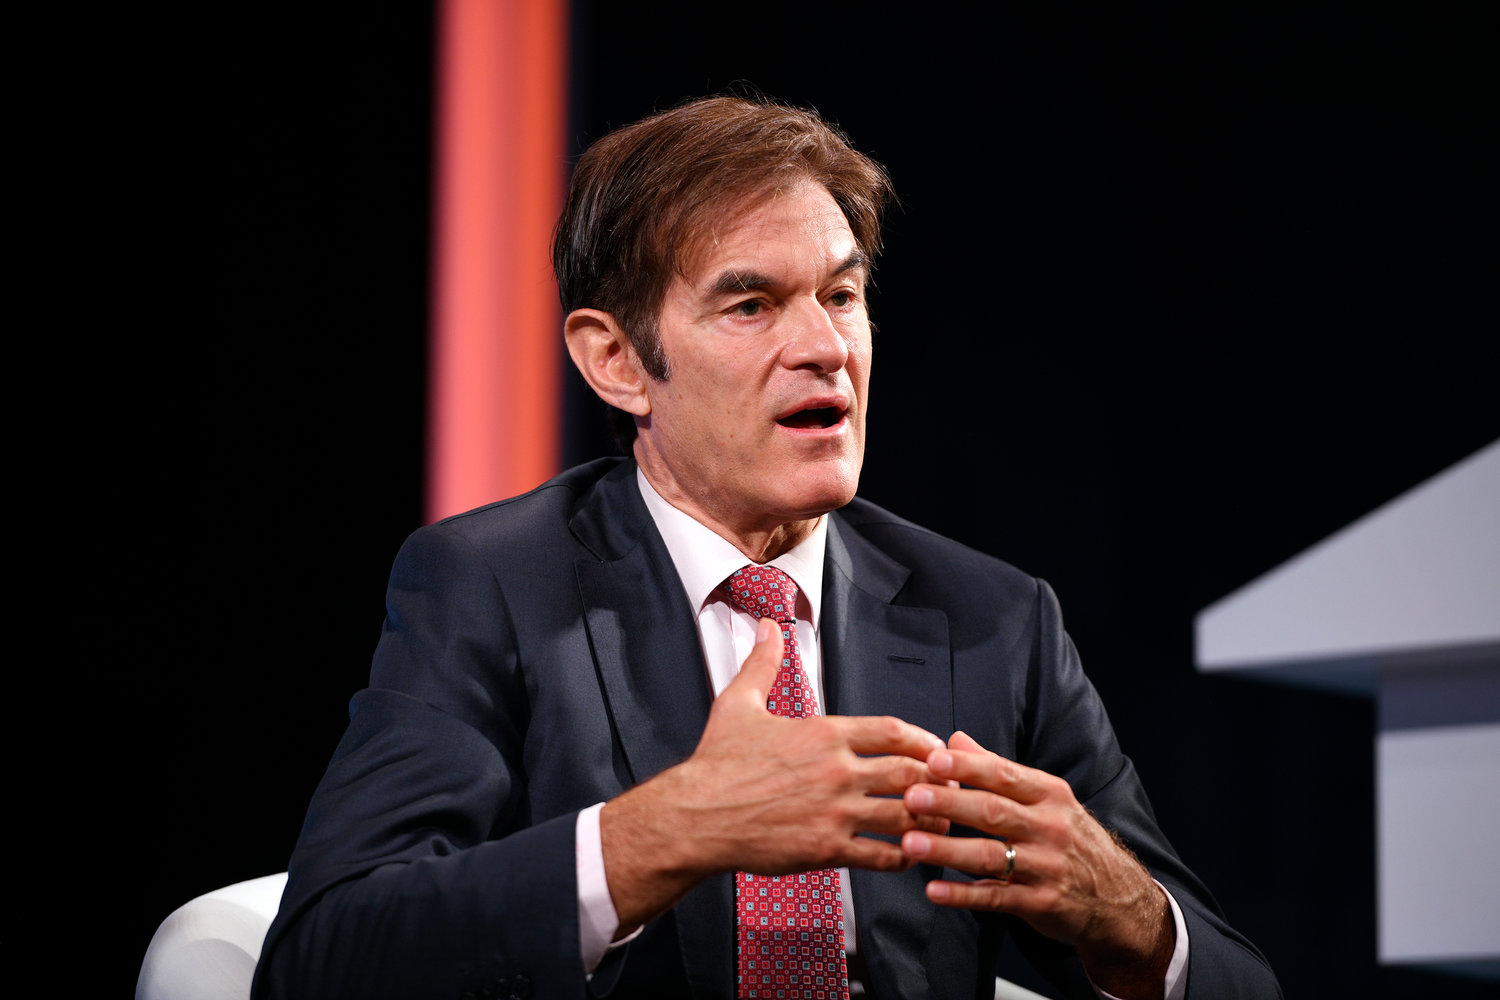 Dr. Mehmet Oz speaks onstage during the 2021 Concordia Annual Summit at the Sheraton New York on Sept. 21, 2021, in New York City. (Riccardo Savi/Getty Images for Concordia Summit/TNS)